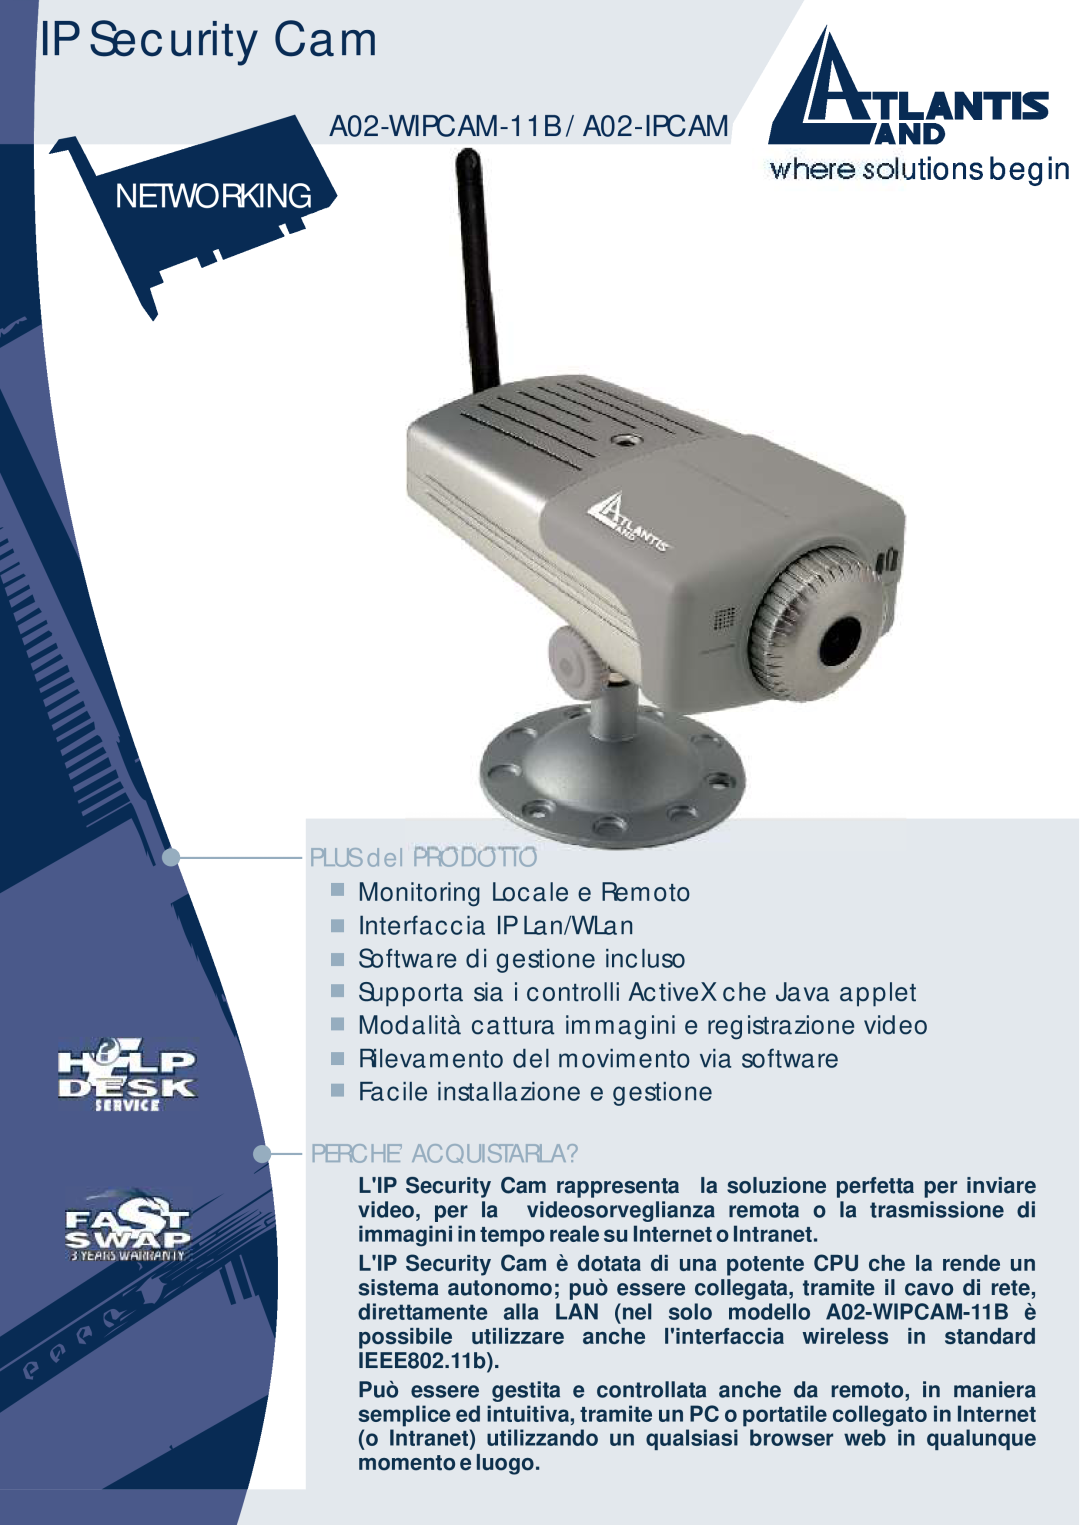 Atlantis Land manual IP Security Cam, Networking, where solutions begin, A02-WIPCAM-11B / A02-IPCAM, PLUS del PRODOTTO 